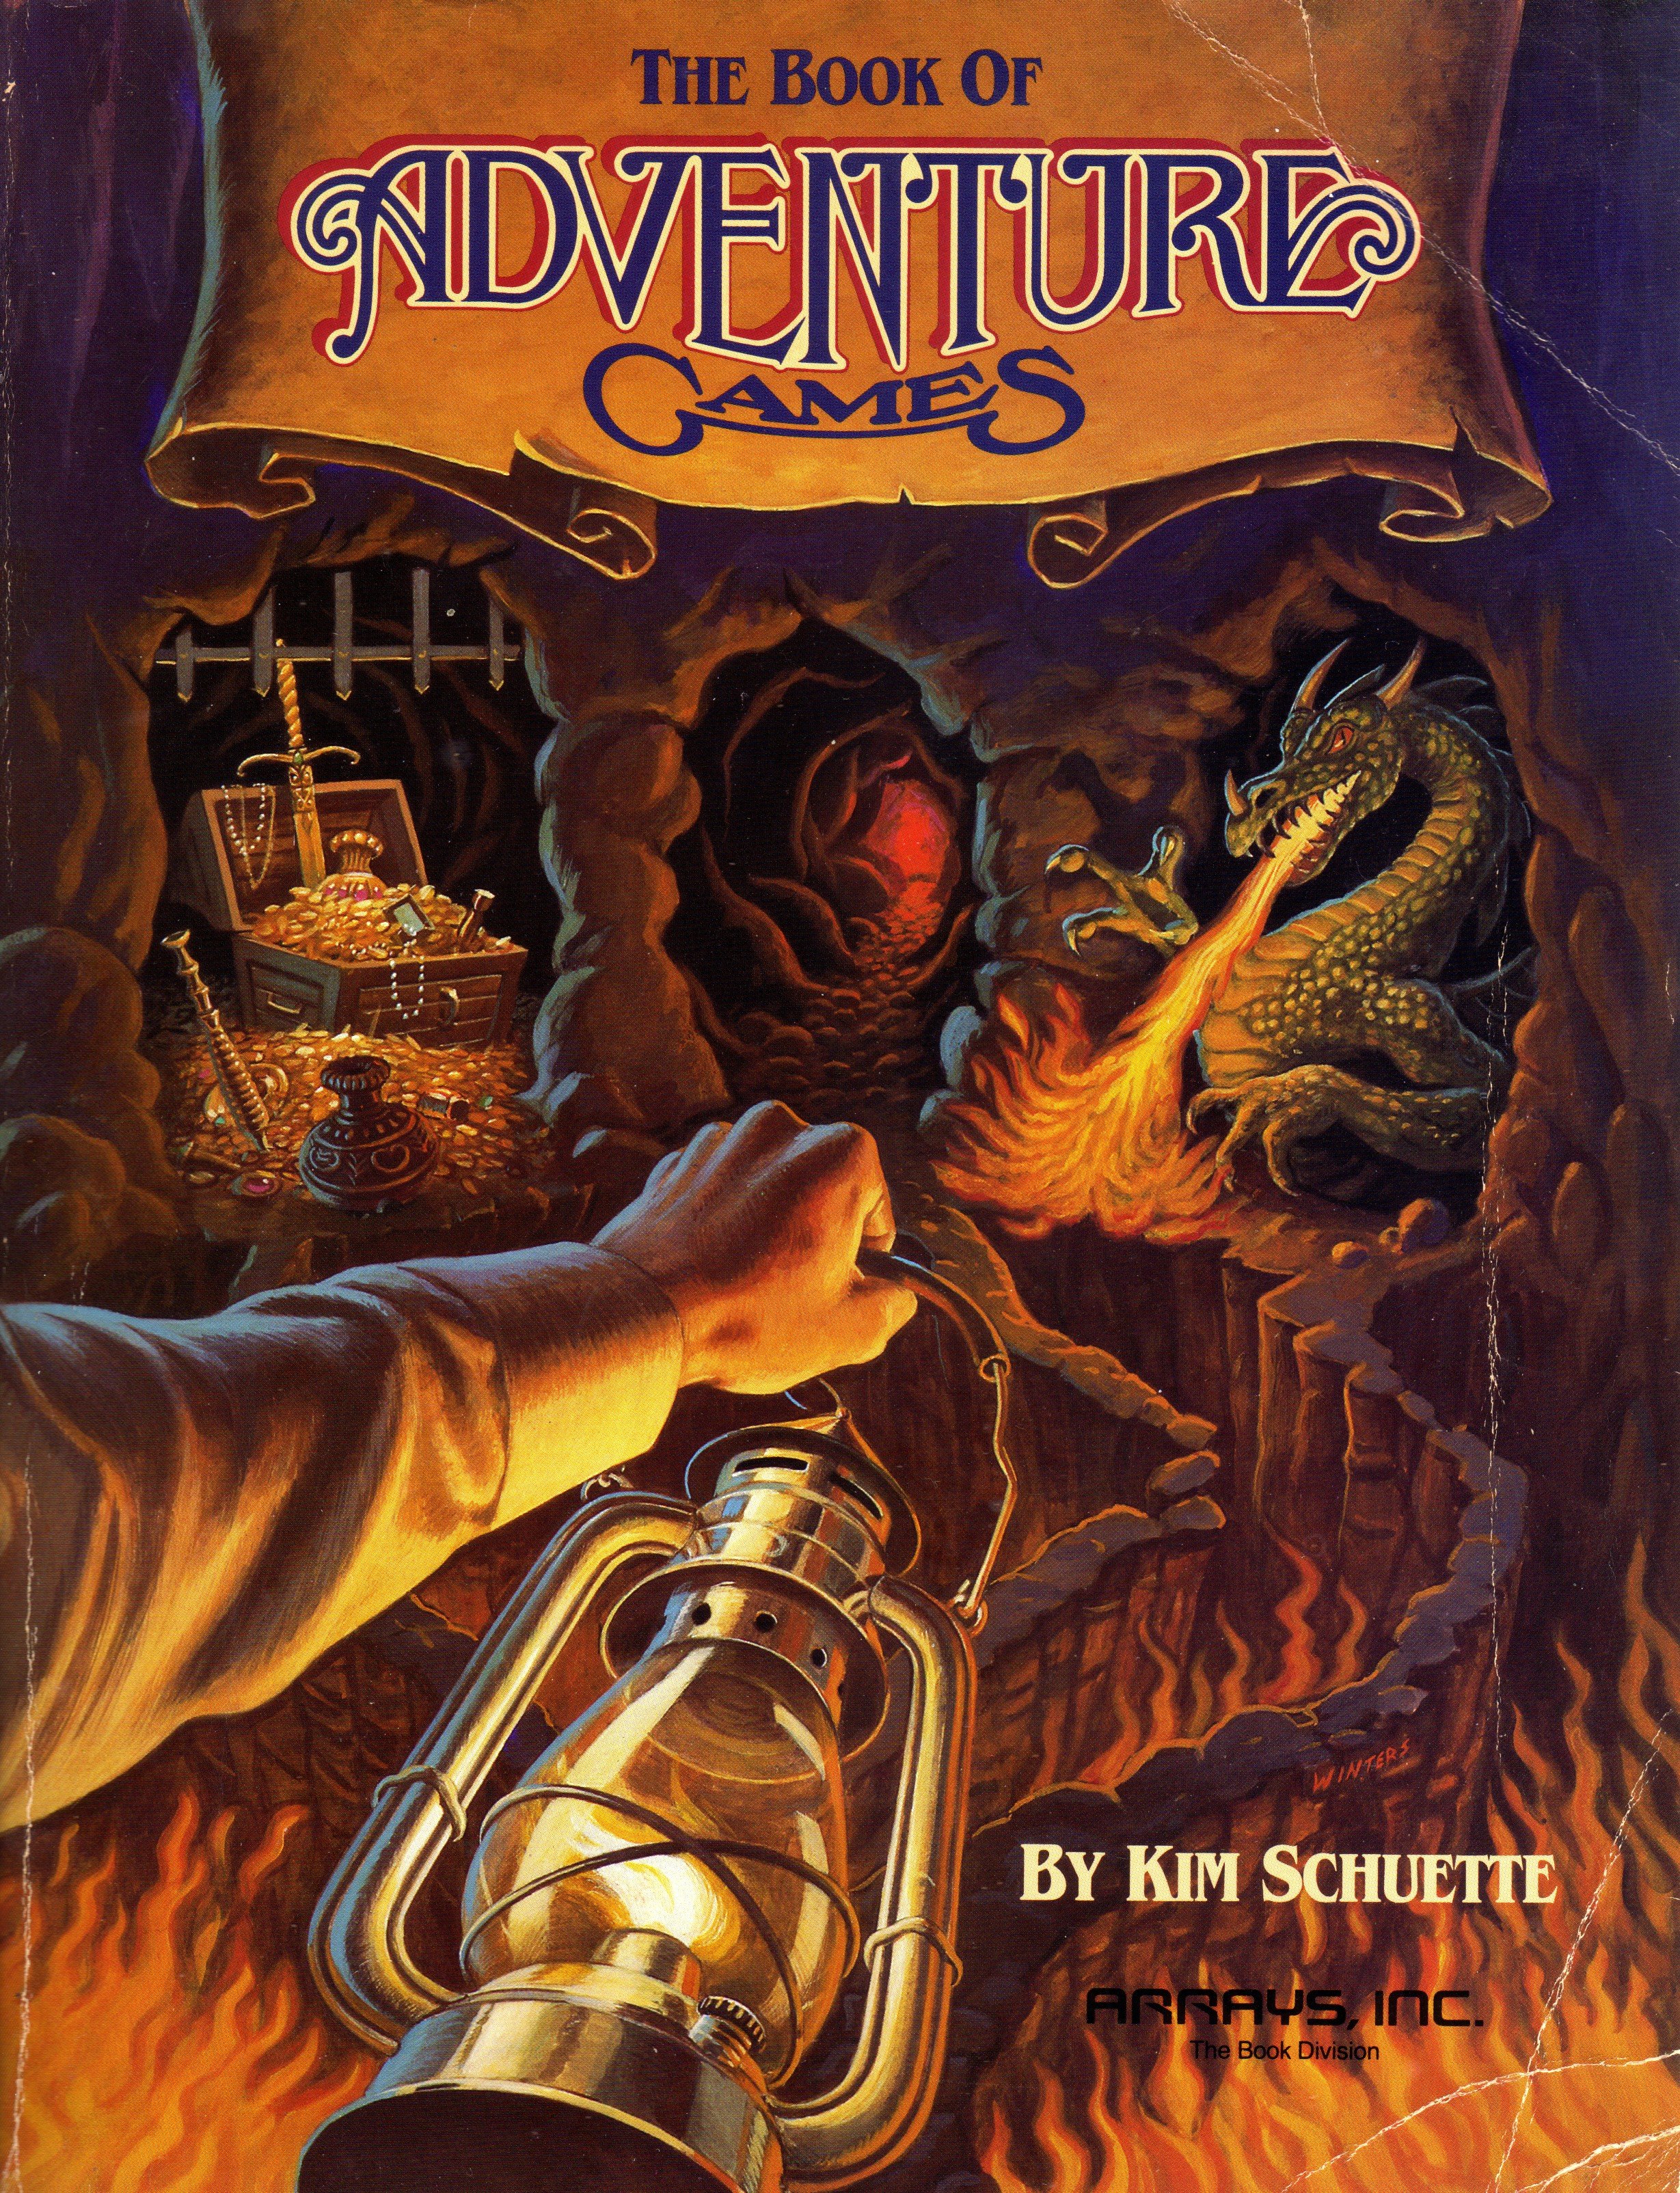 Book of Adventure Games, The